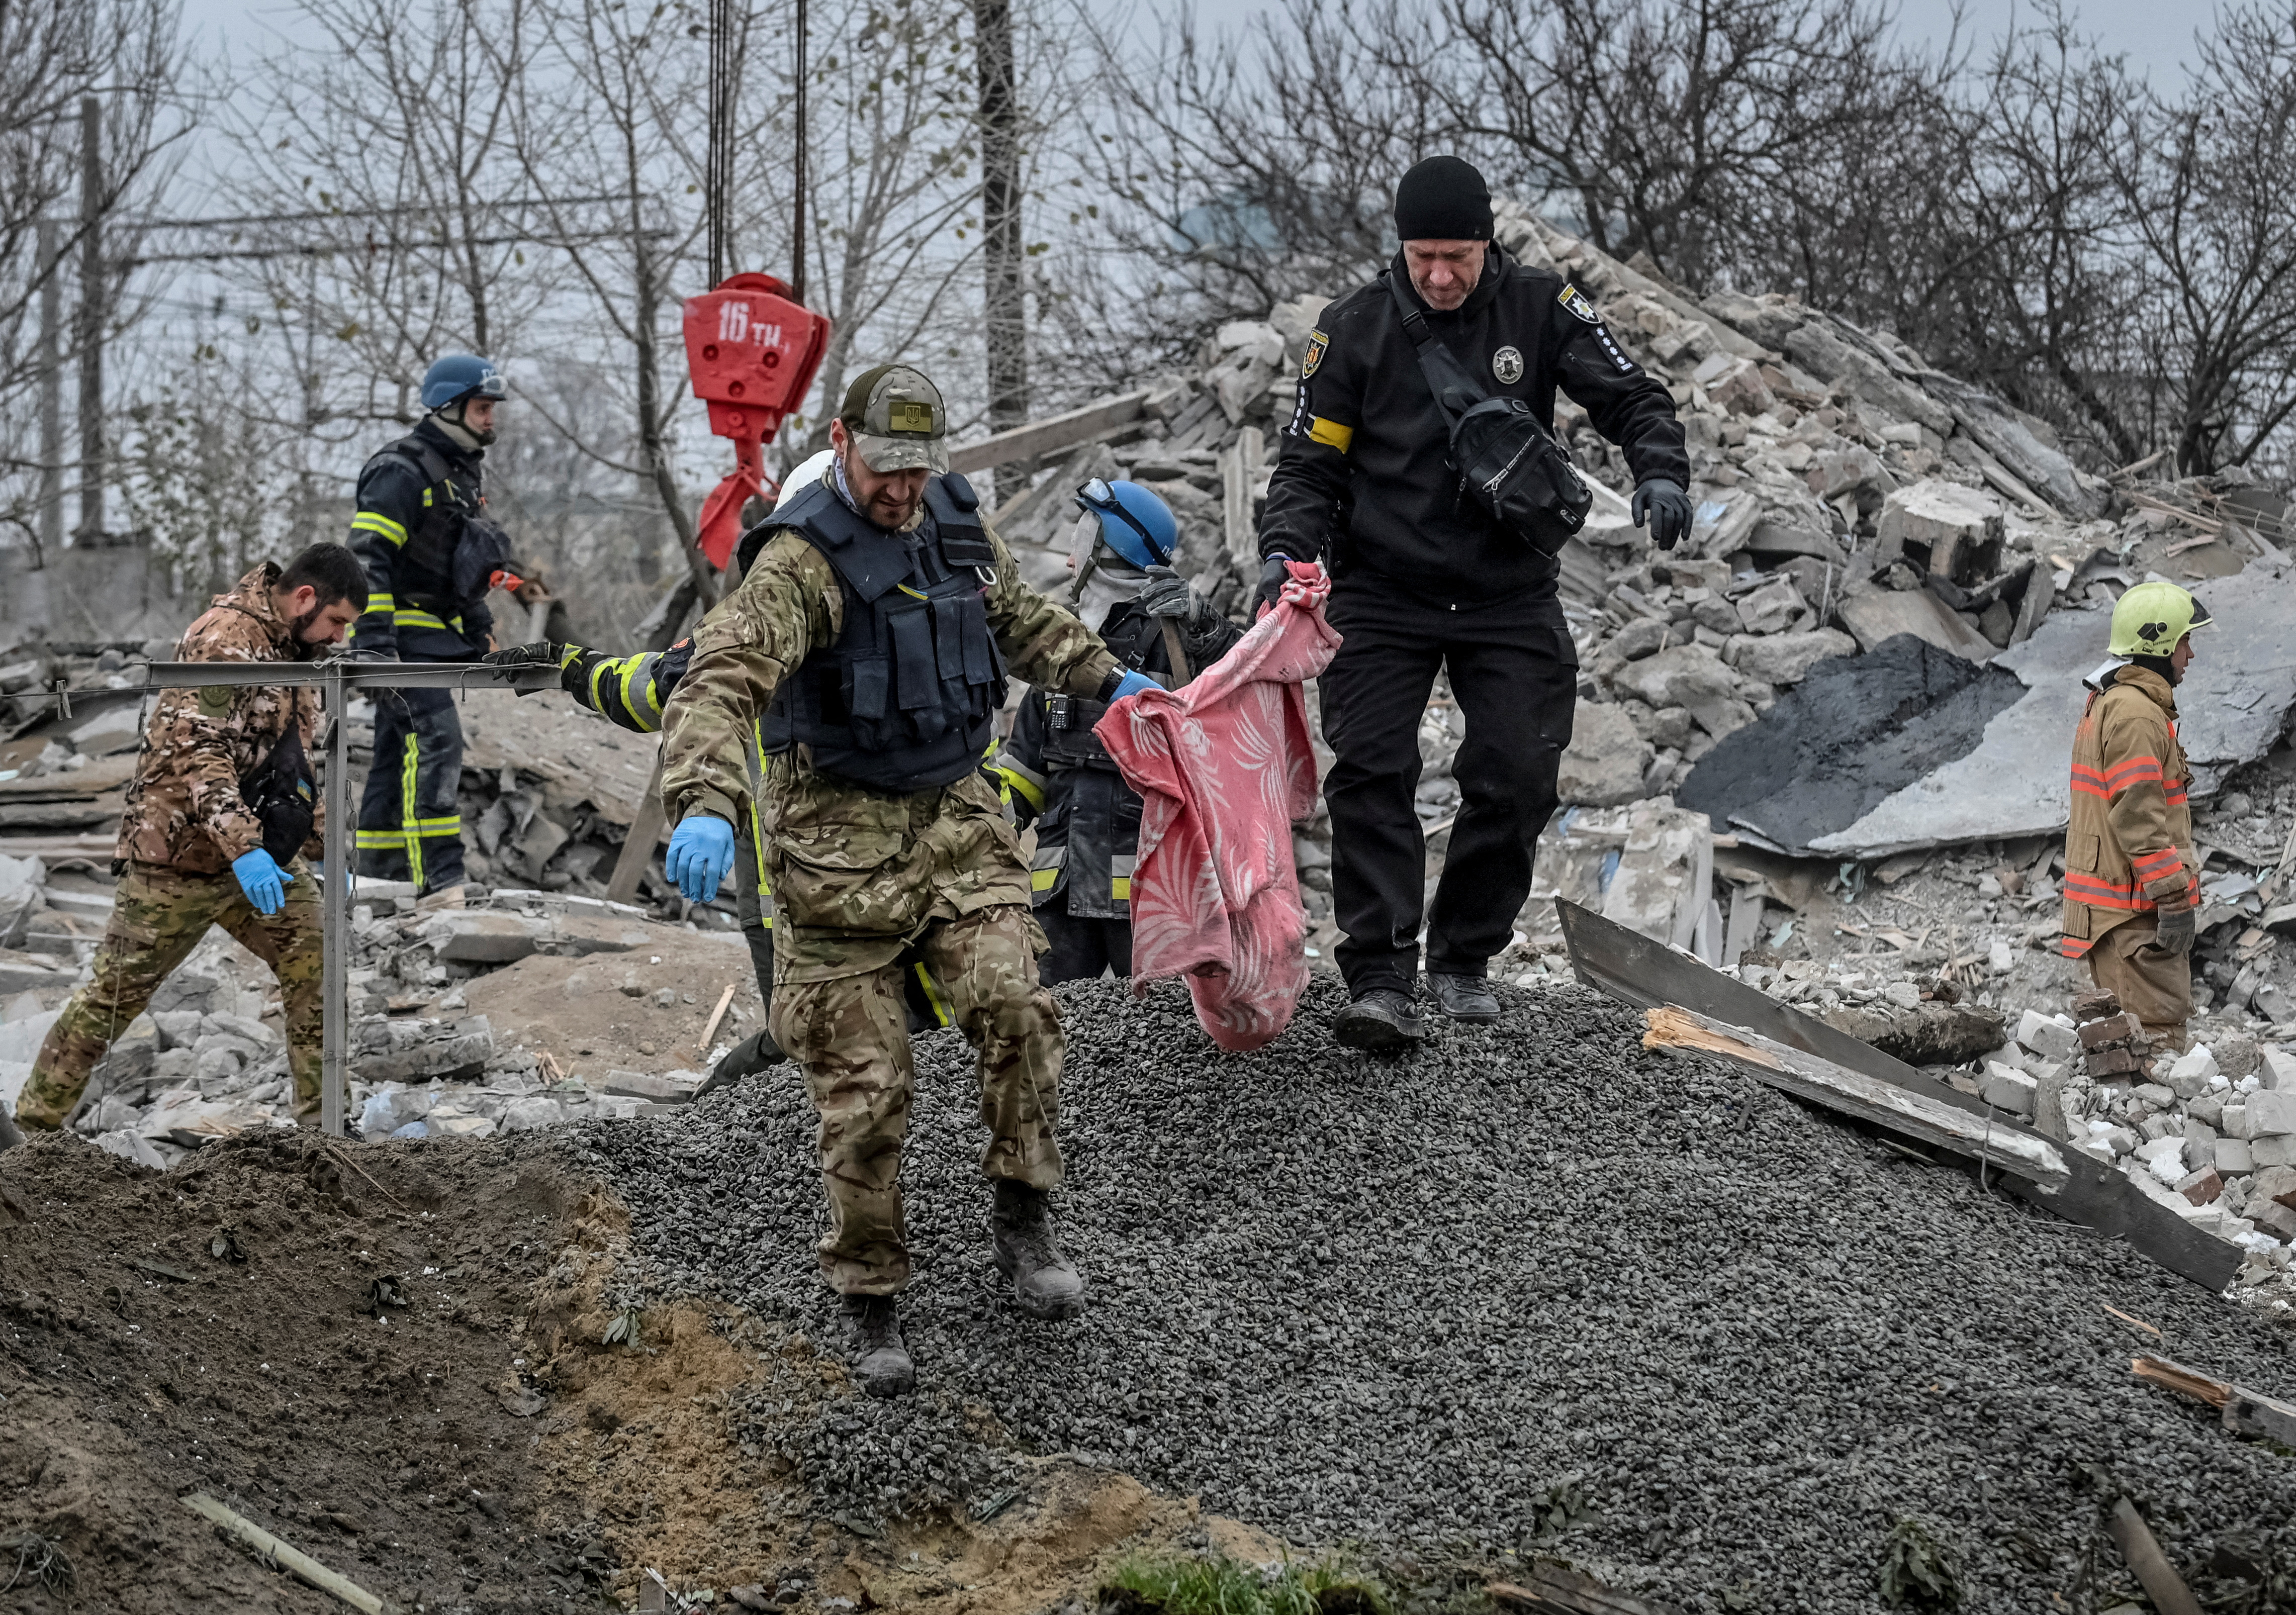 Police officers carry a fragments of the body found under debris of a residential house destroyed by a Russian missile strike in the town of Vilniansk